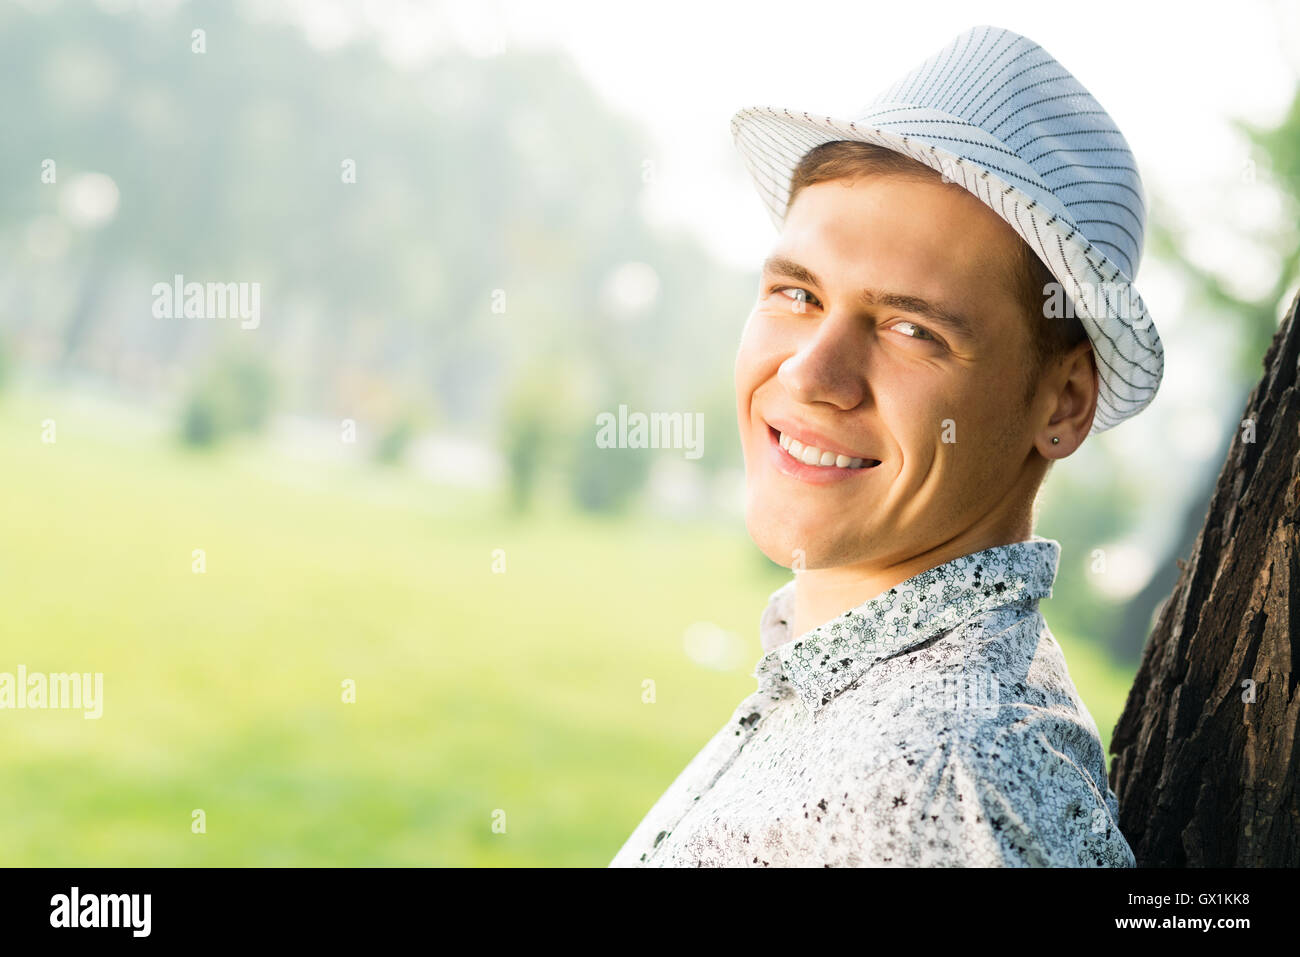 portrait of a young man Stock Photo